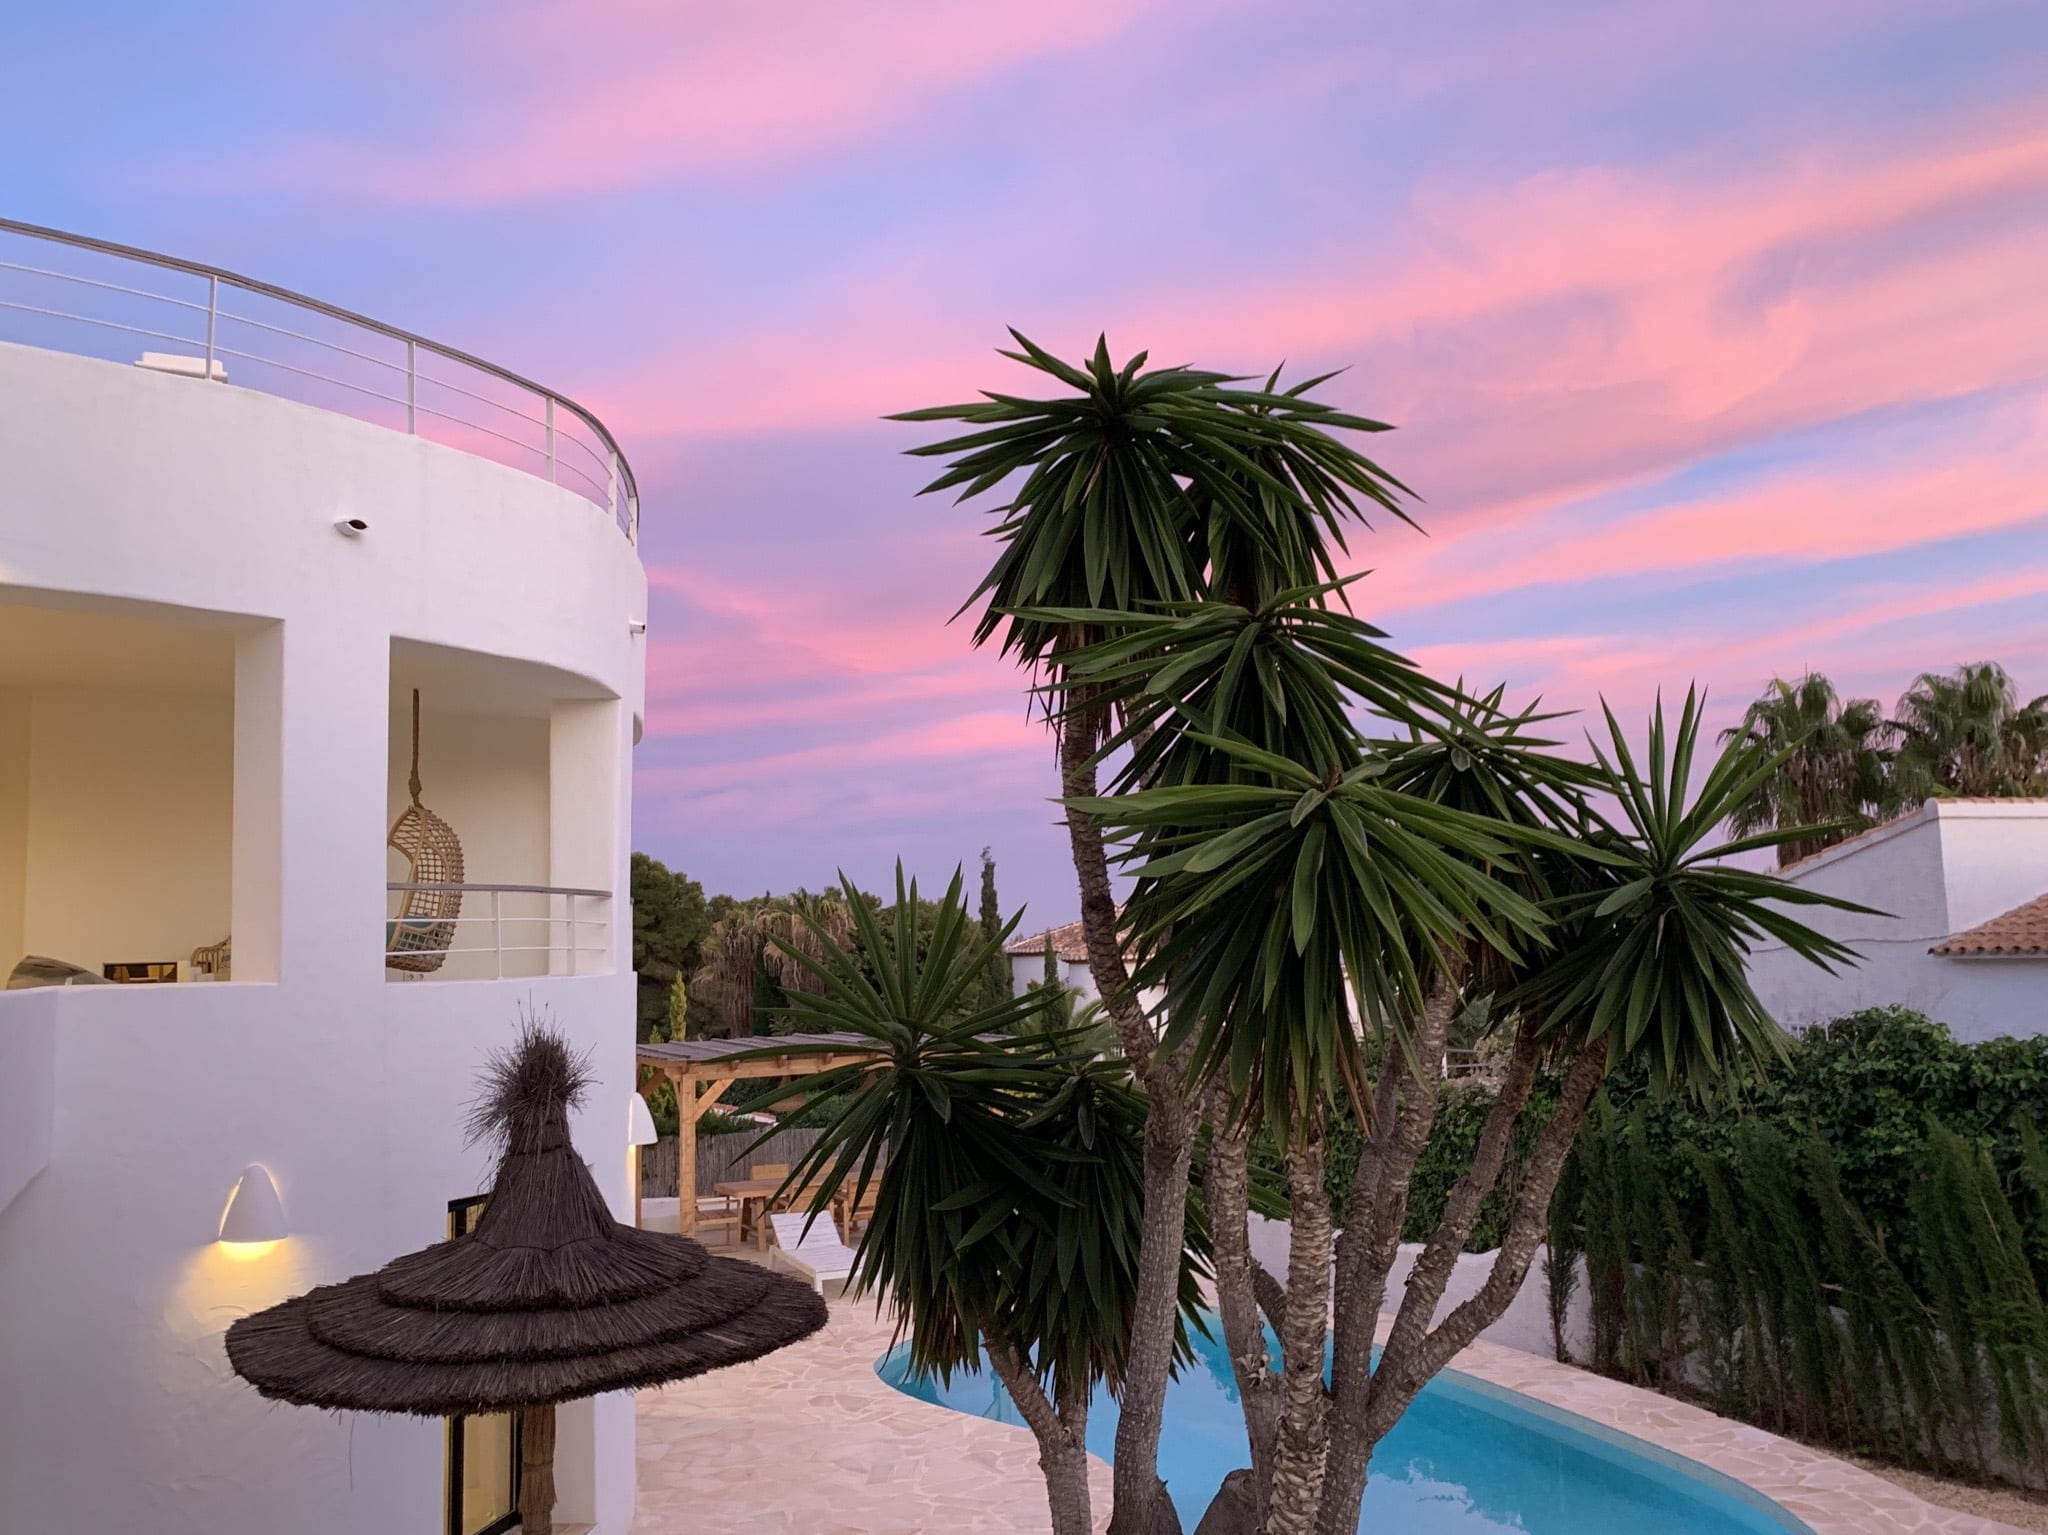 investment property in Spain with pool during sunset